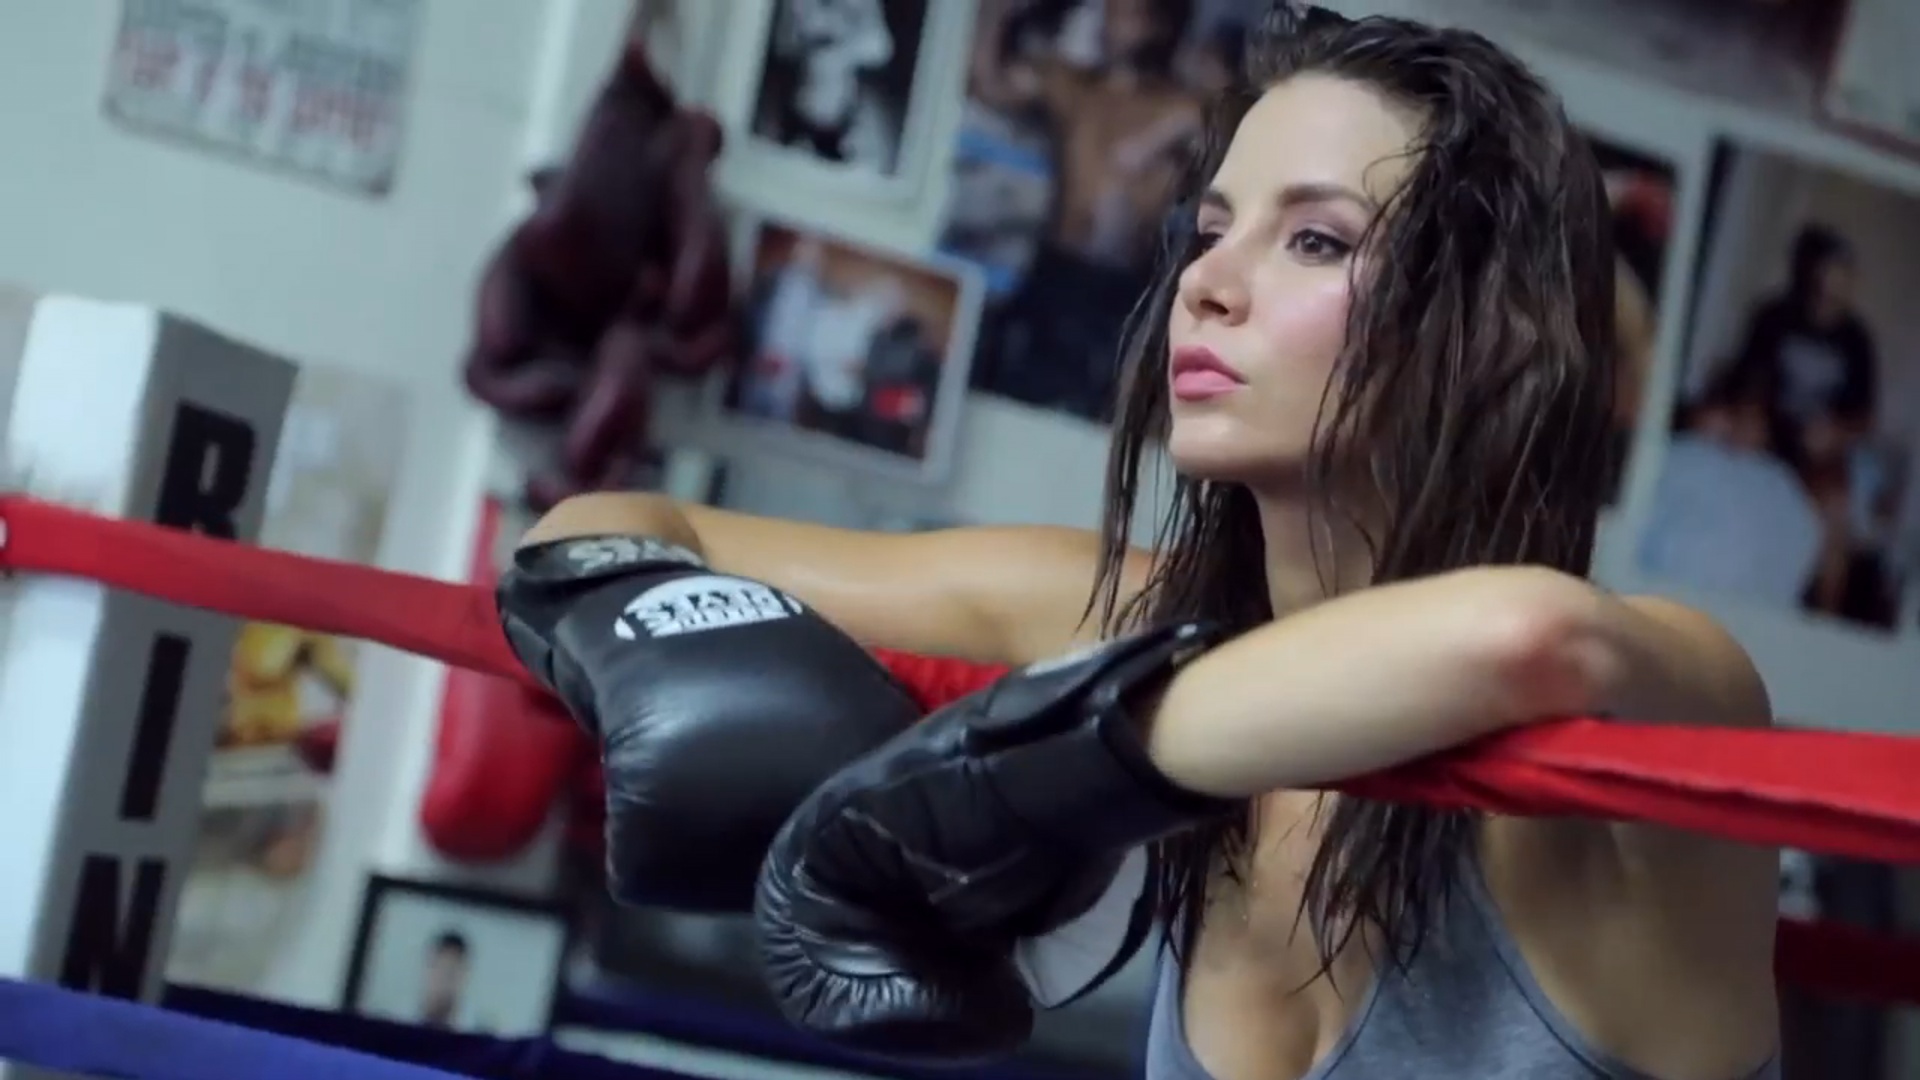 Kacey Barnfield Boxing Shoot Behind the Scenes Video Captures.